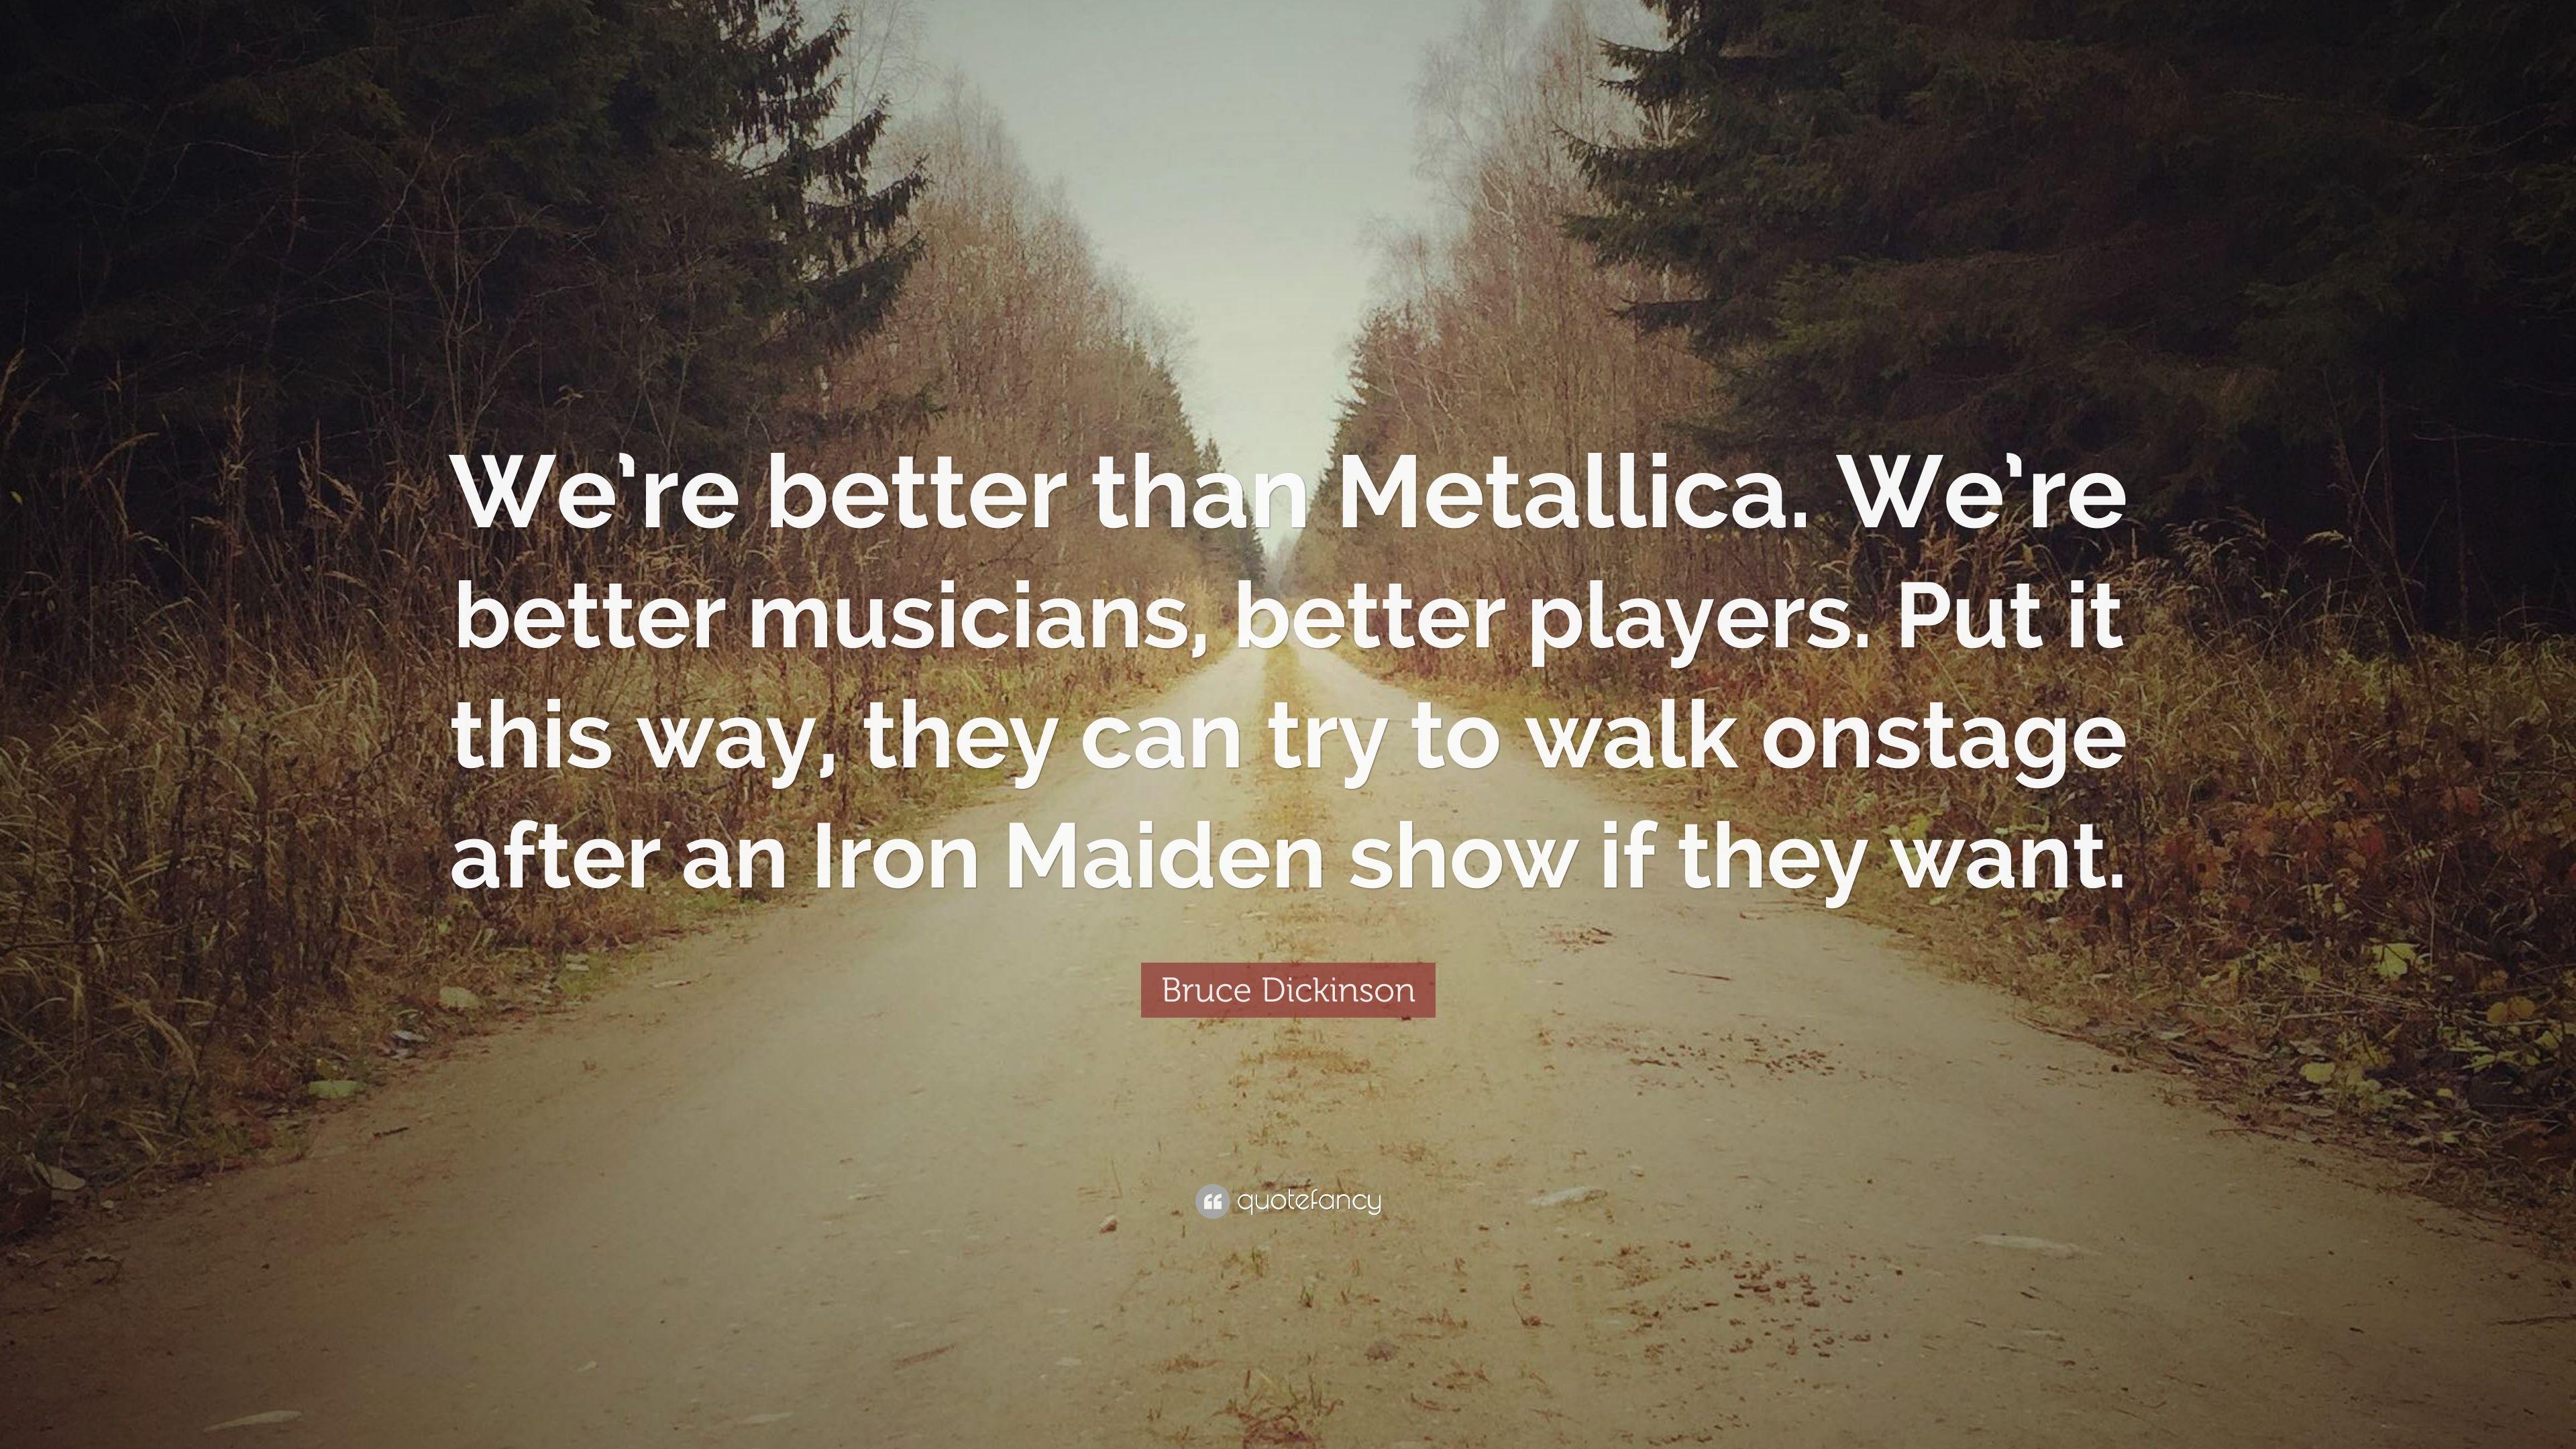 Bruce Dickinson Quote: “We're better than Metallica. We're better